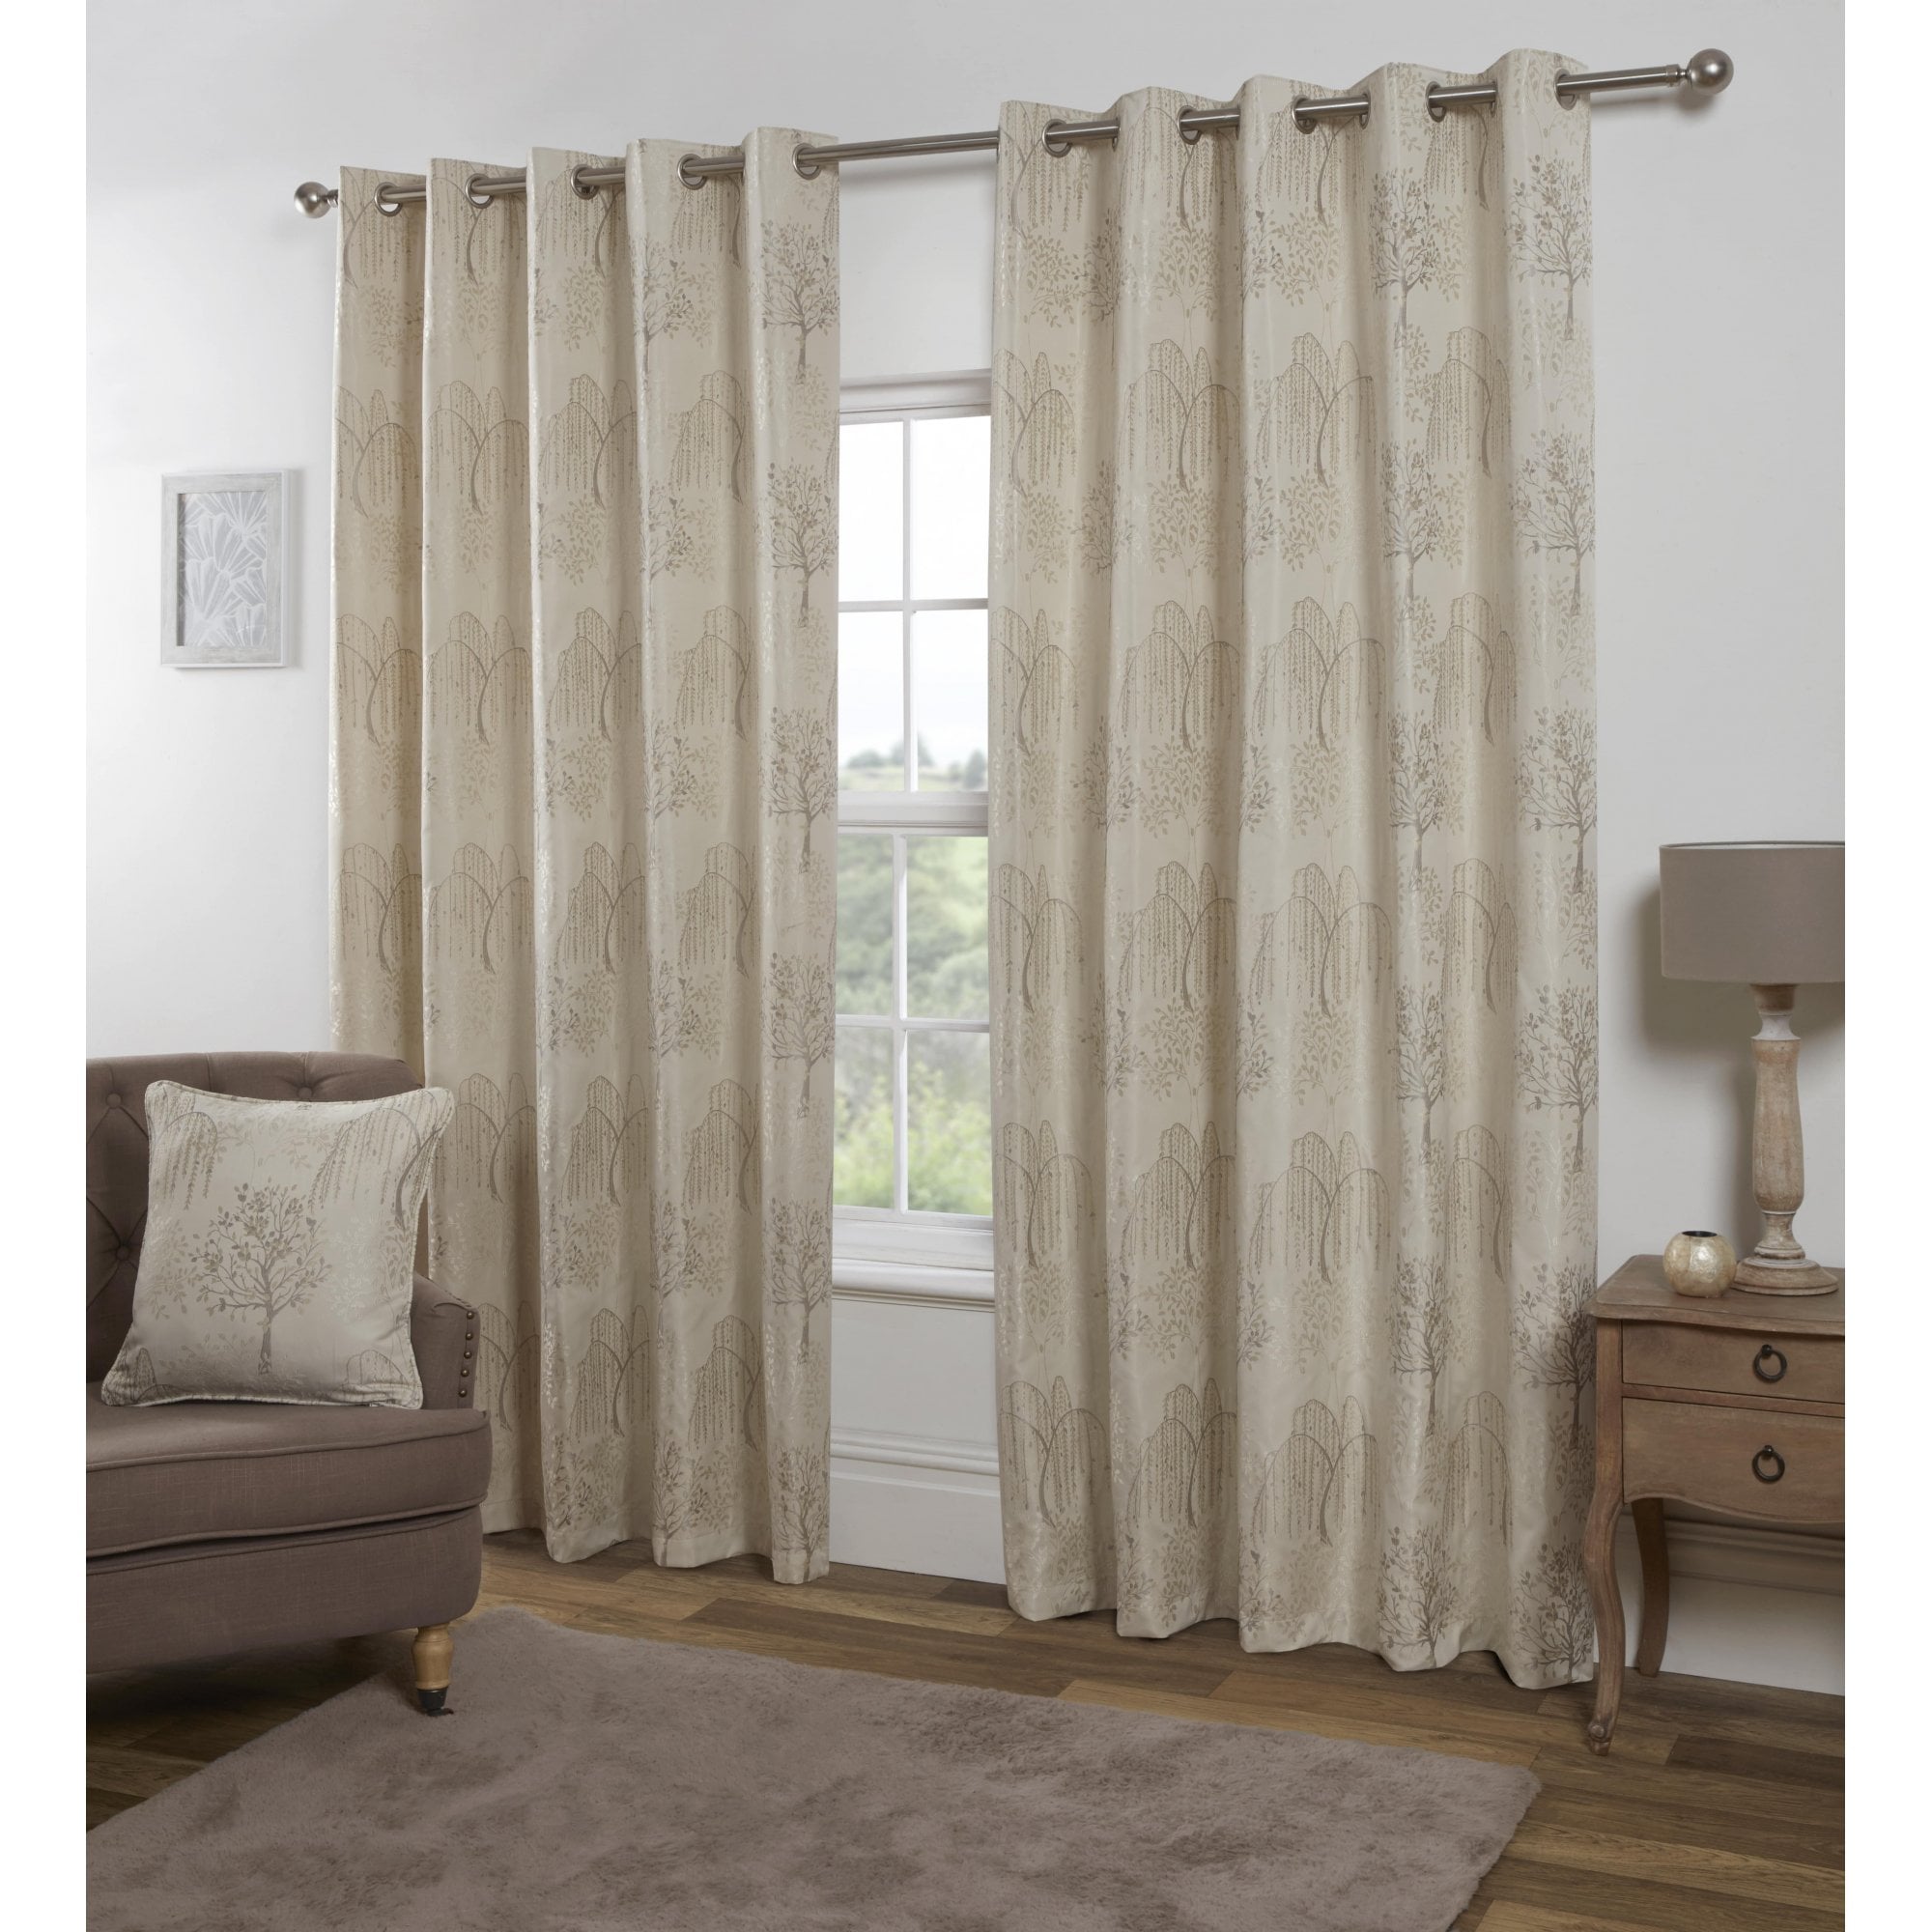 Lewis's Orchard Patterned Eyelet Curtains - Ivory